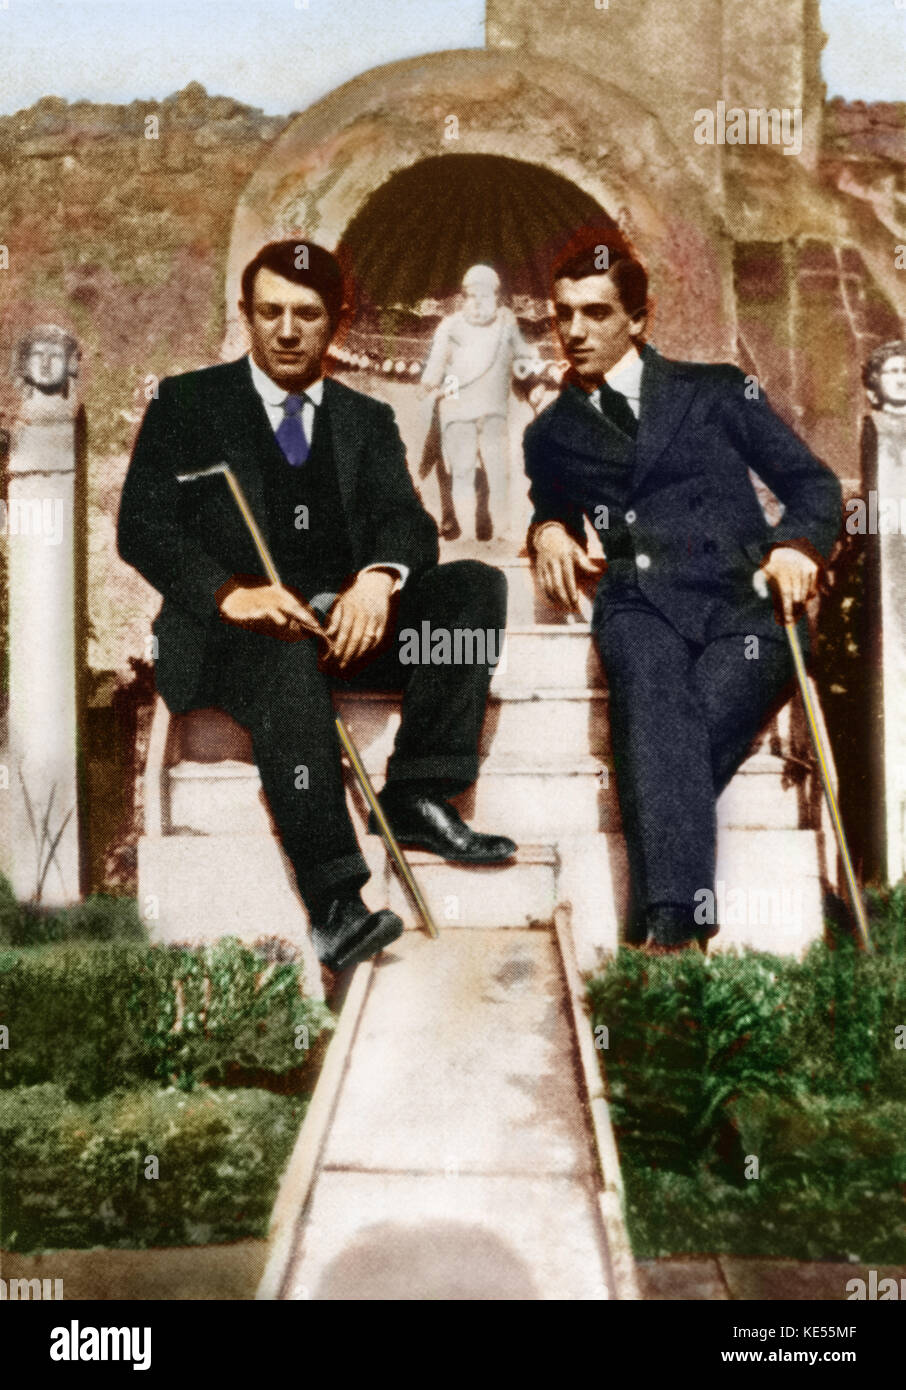 Massine and Picasso in Pompeii in 1917 Léonide Fedorovich Massine (Russ.-Amer. dancer & choreographer, 1895-d) and Pablo Picasso (1881-1973). Associated with the Ballet Russe de Diaghilev. Colourised version. Stock Photo